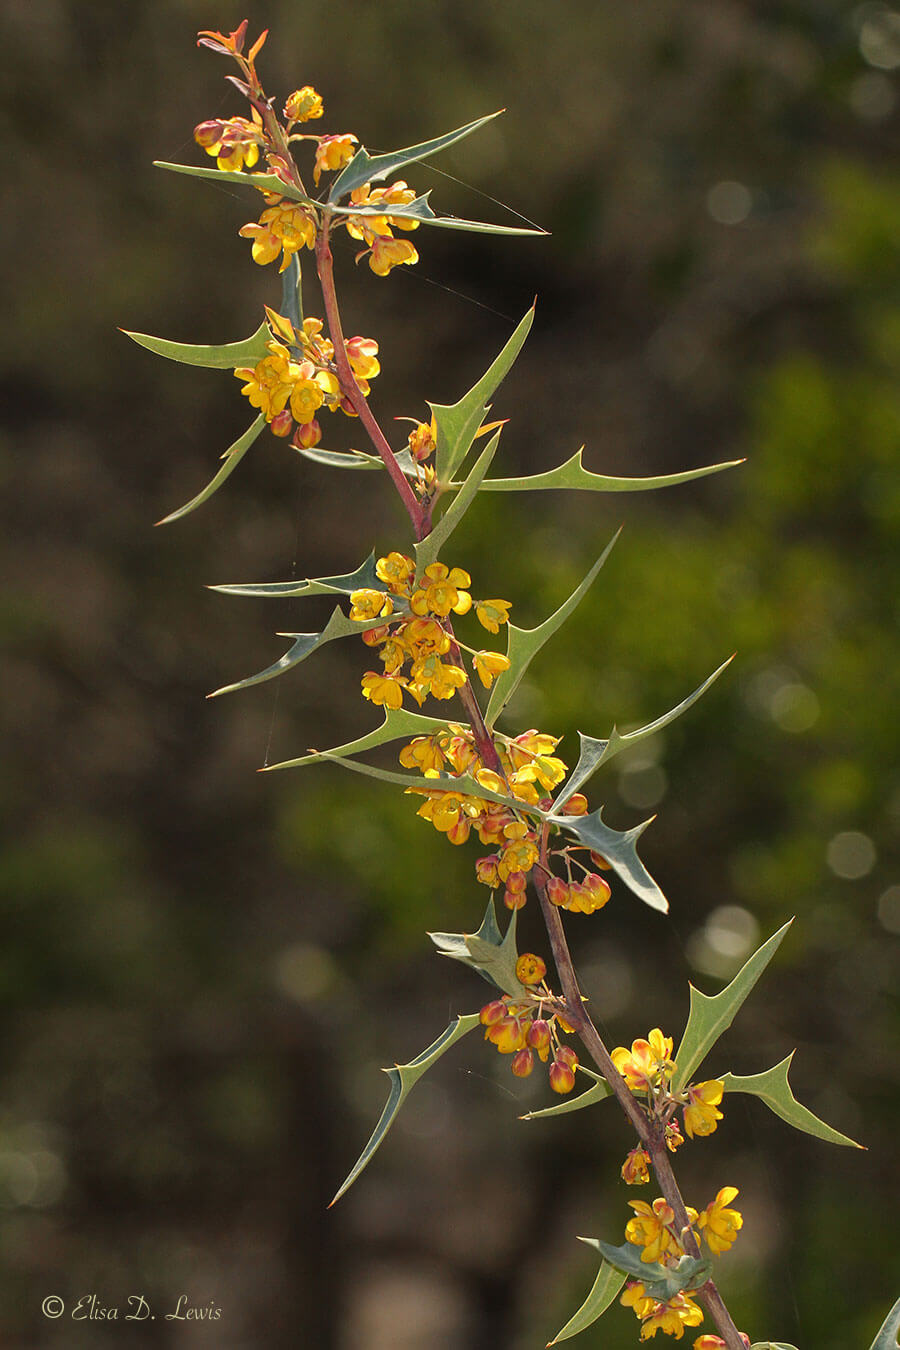 Agarita branch with flowers